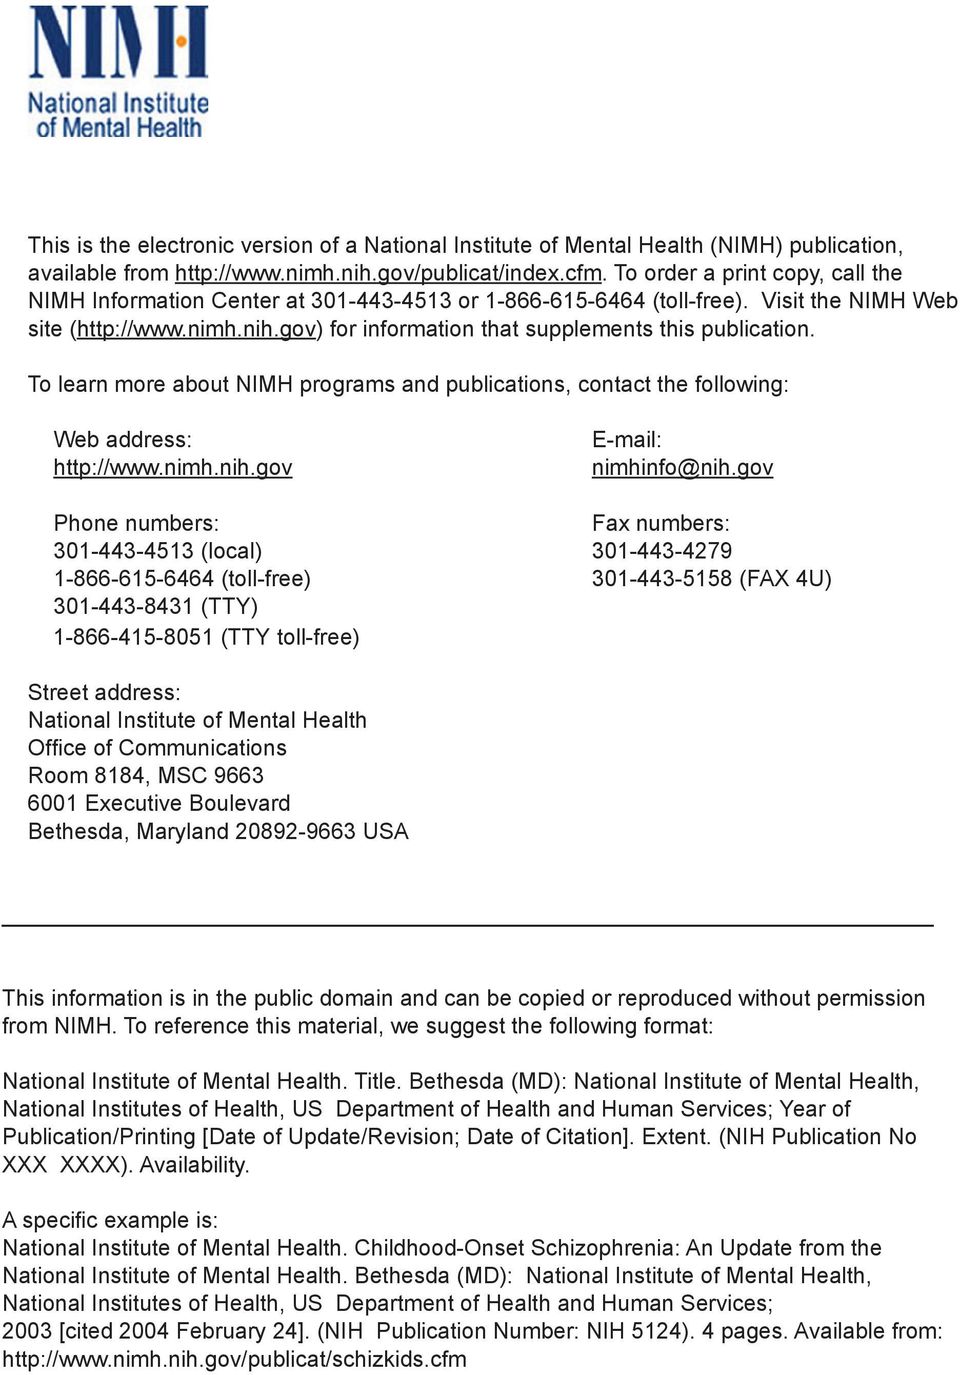 gov) for information that supplements this publication. To learn more about NIMH programs and publications, contact the following: Web address: http://www.nimh.nih.gov E-mail: nimhinfo@nih.